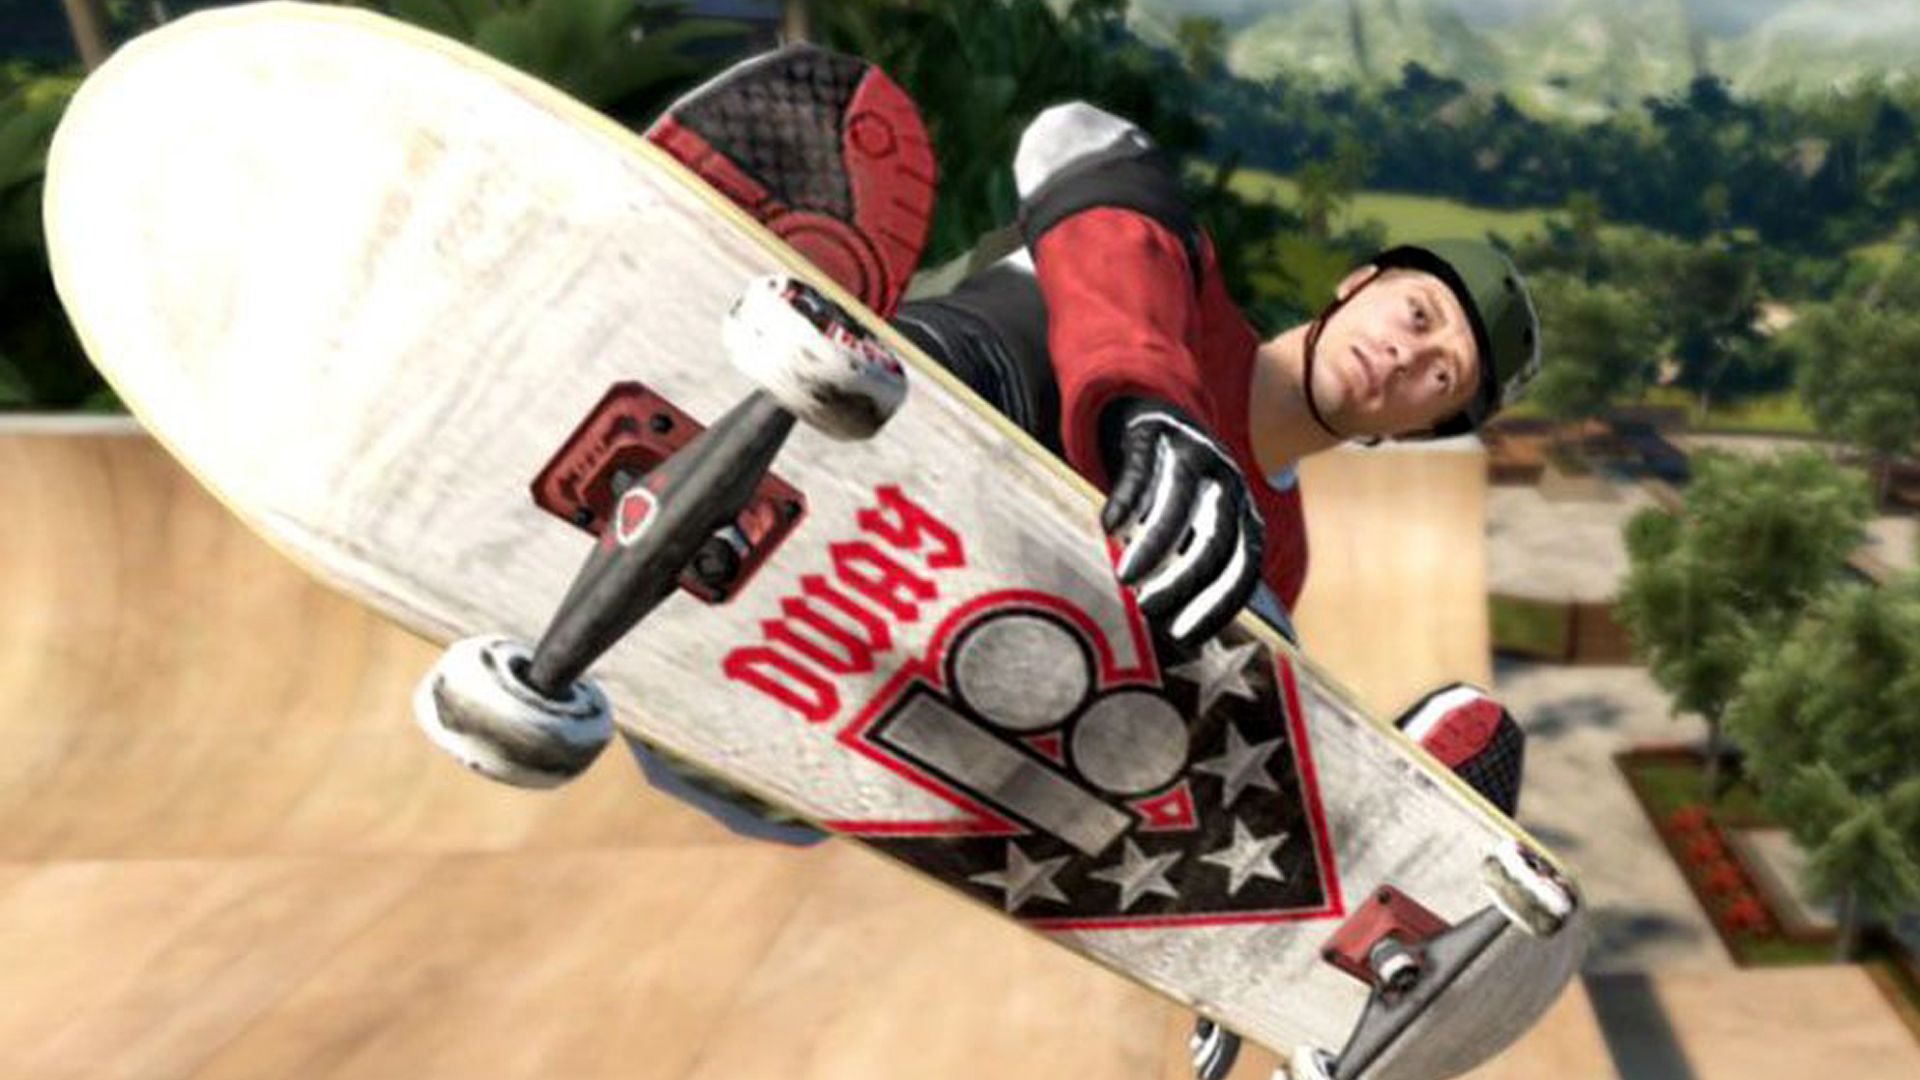 Skate 4 Is Now Just 'Skate' And Will Be Free-To-Play When It Launches 